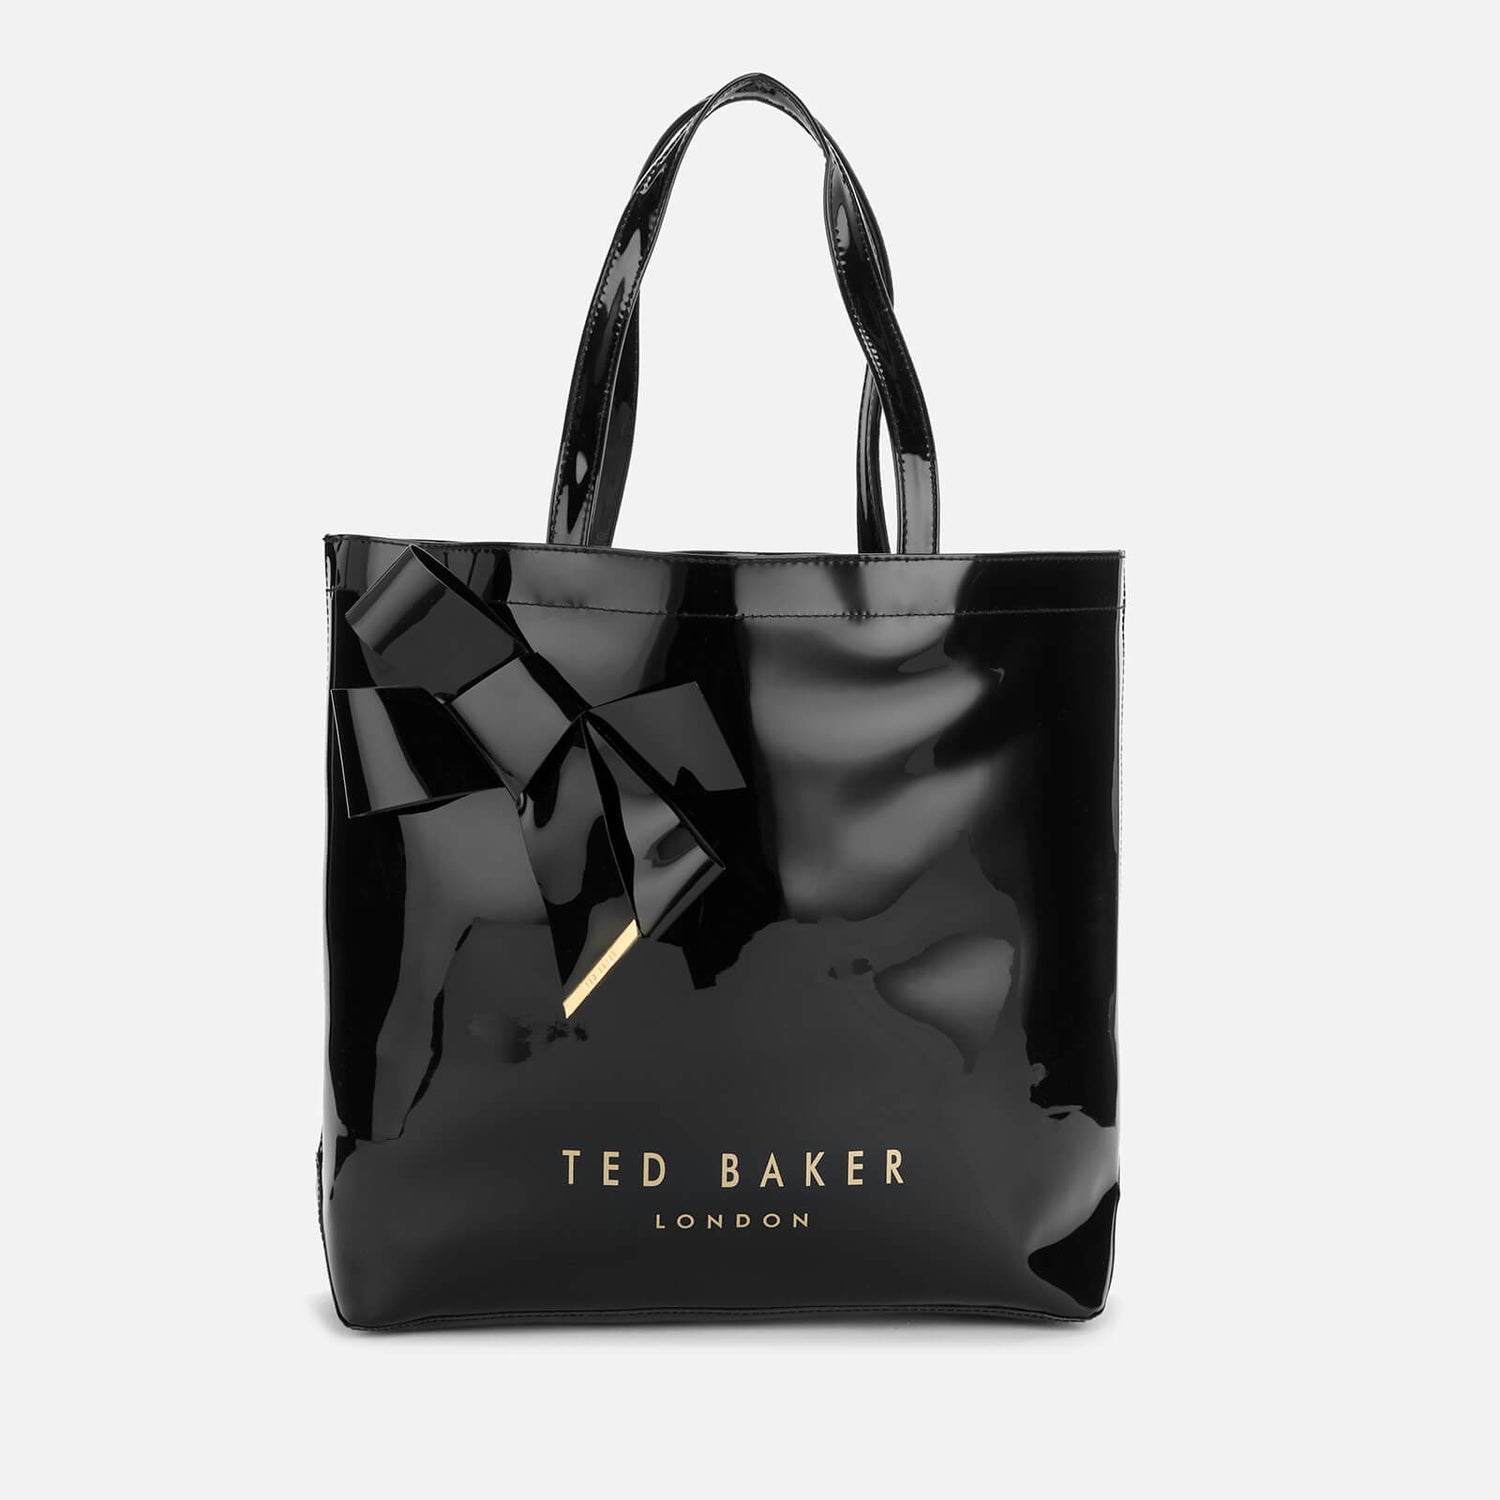 Ted Baker Womens Bags Clearance Online, Save 70% | jlcatj.gob.mx